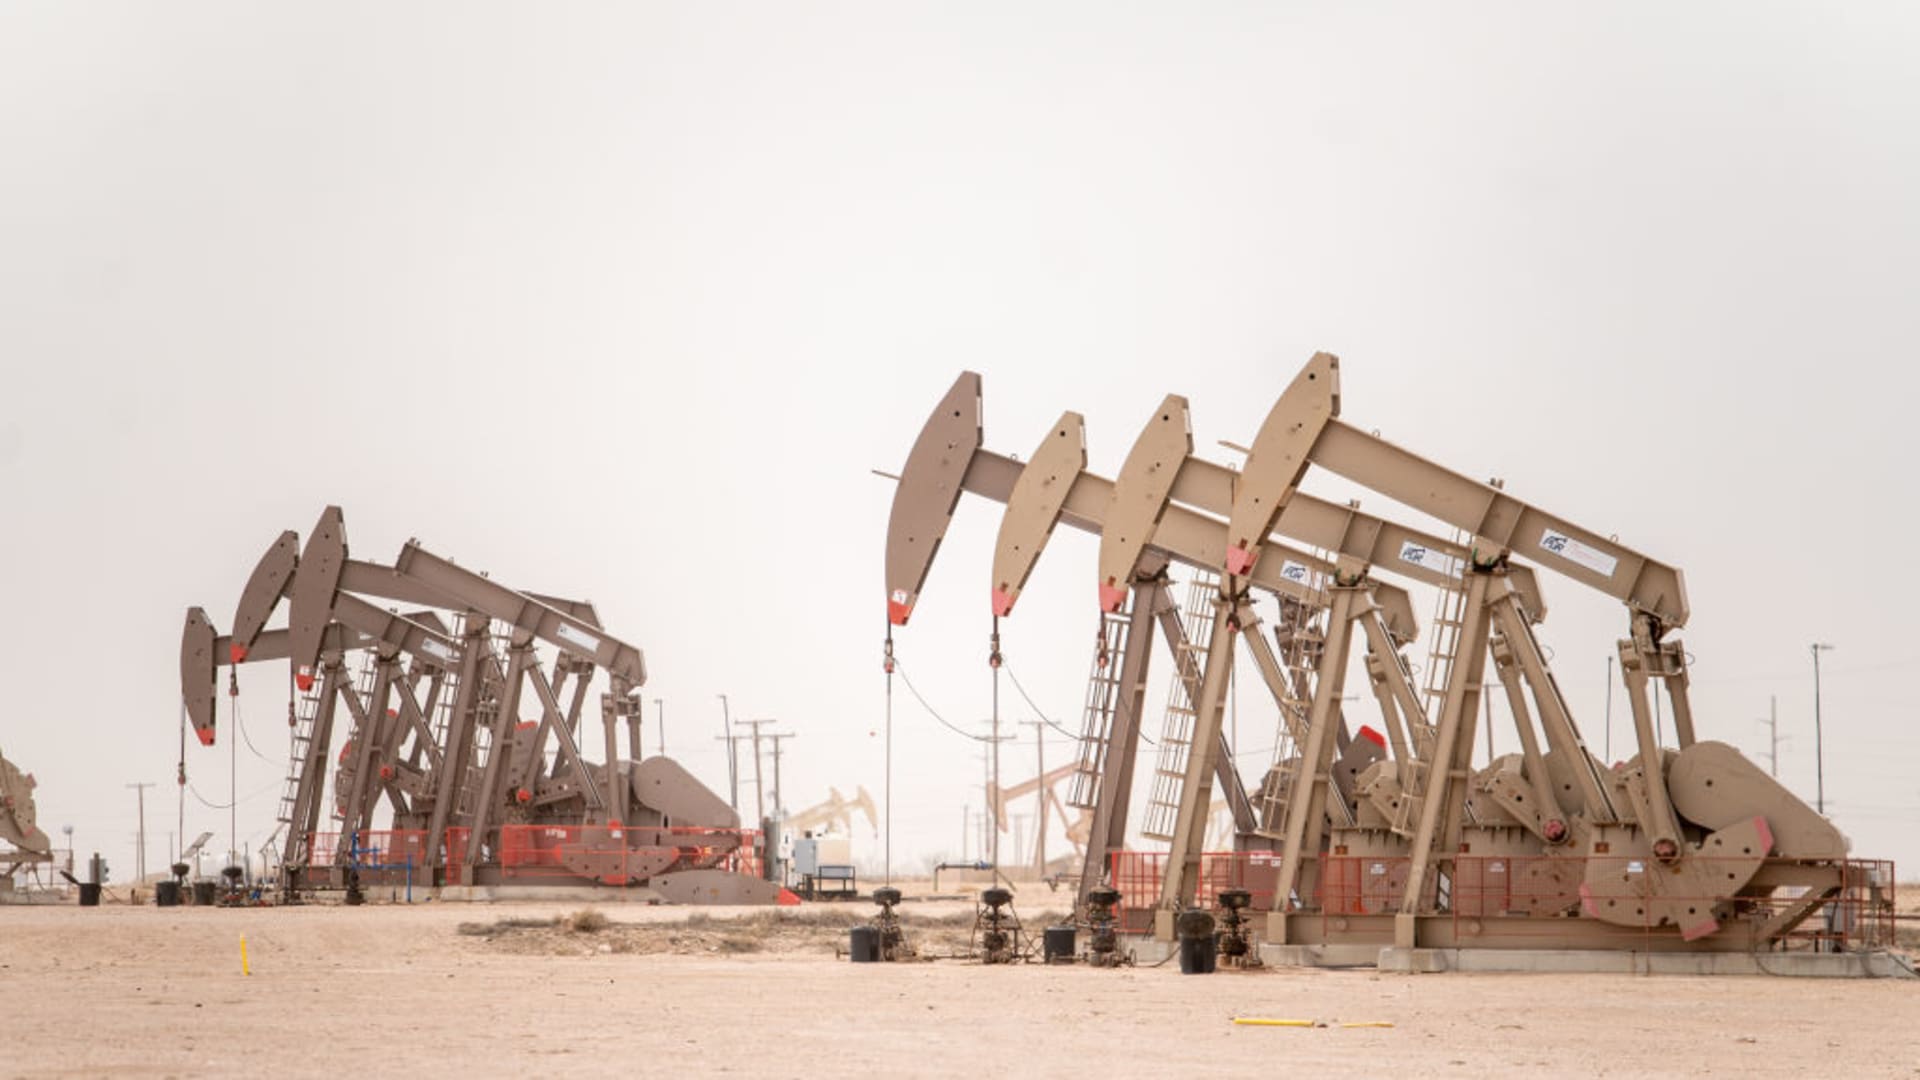 Wall Street predicted a big surge for oil this year. But prices are now lower